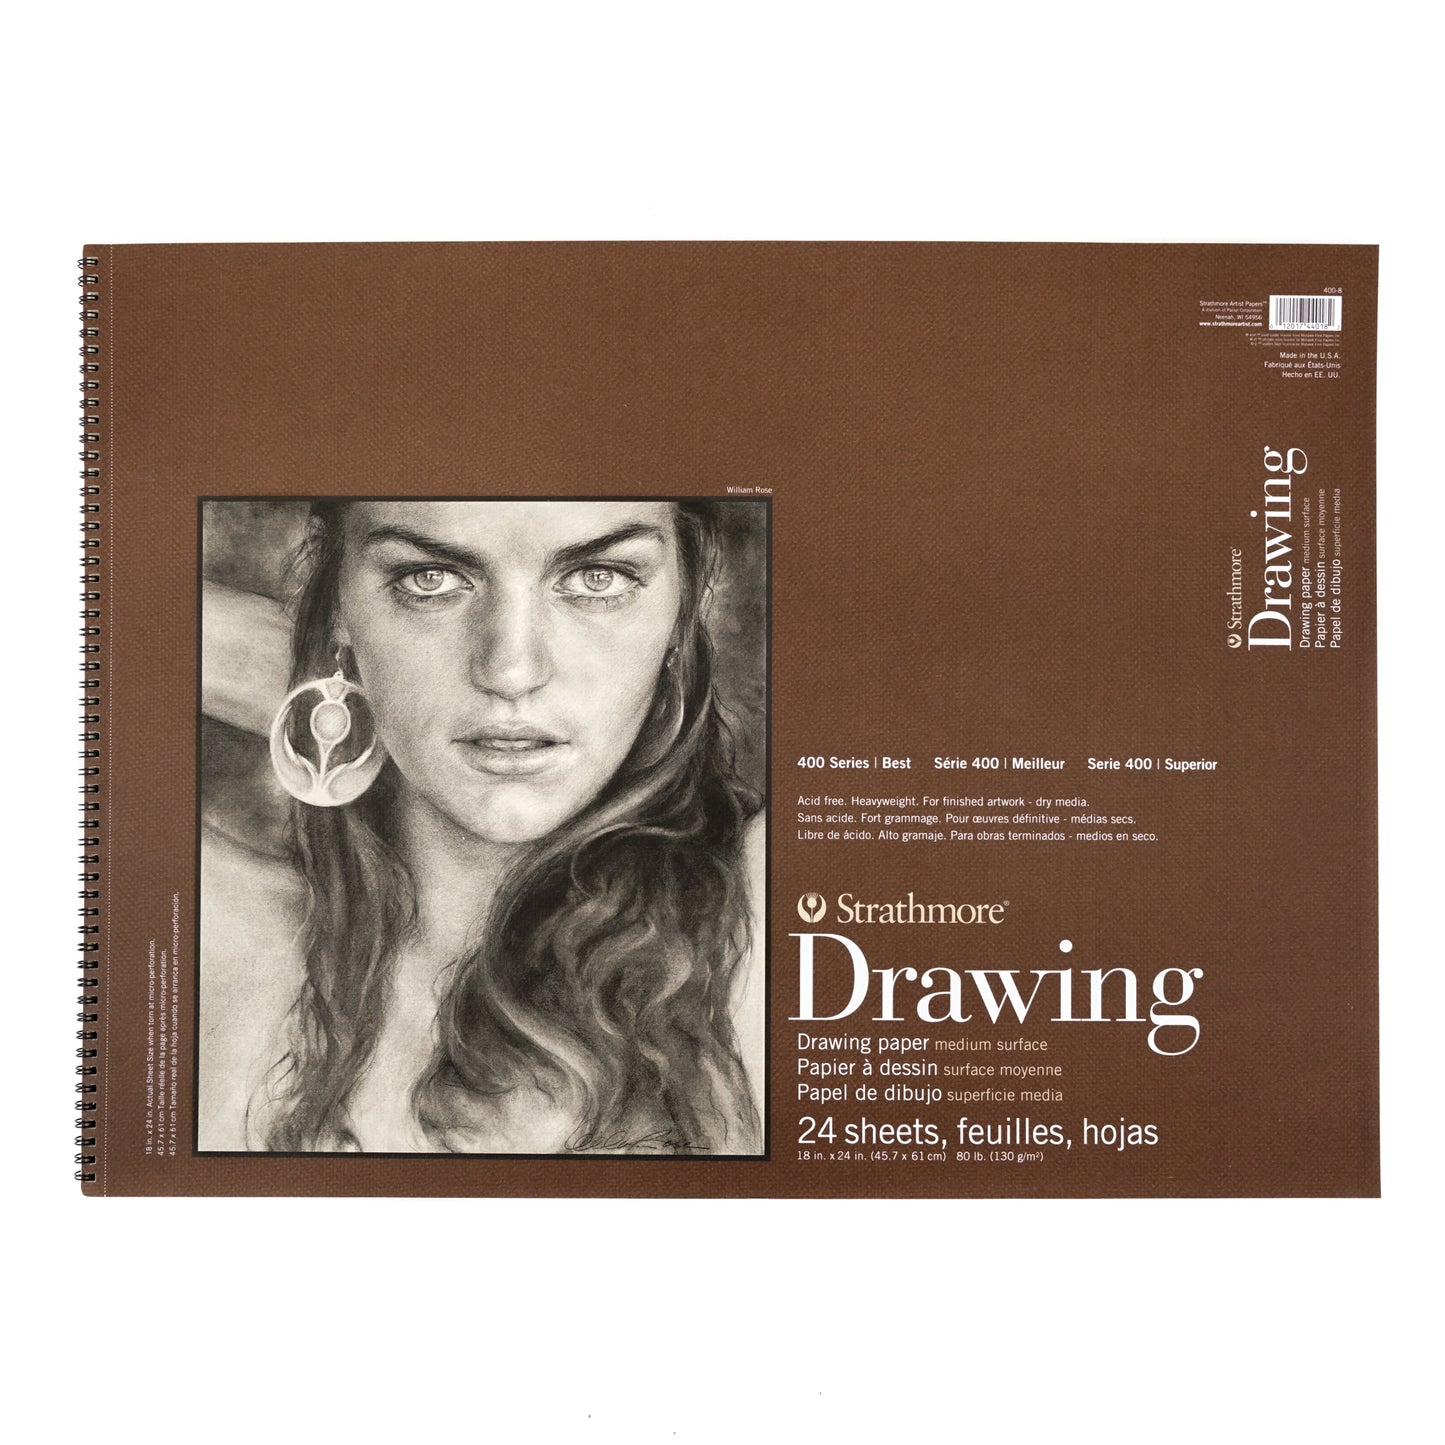 Strathmore Drawing Paper Pad - 400 Series - Medium / Large - 18 x 24 inches - Medium Surface by Strathmore - K. A. Artist Shop